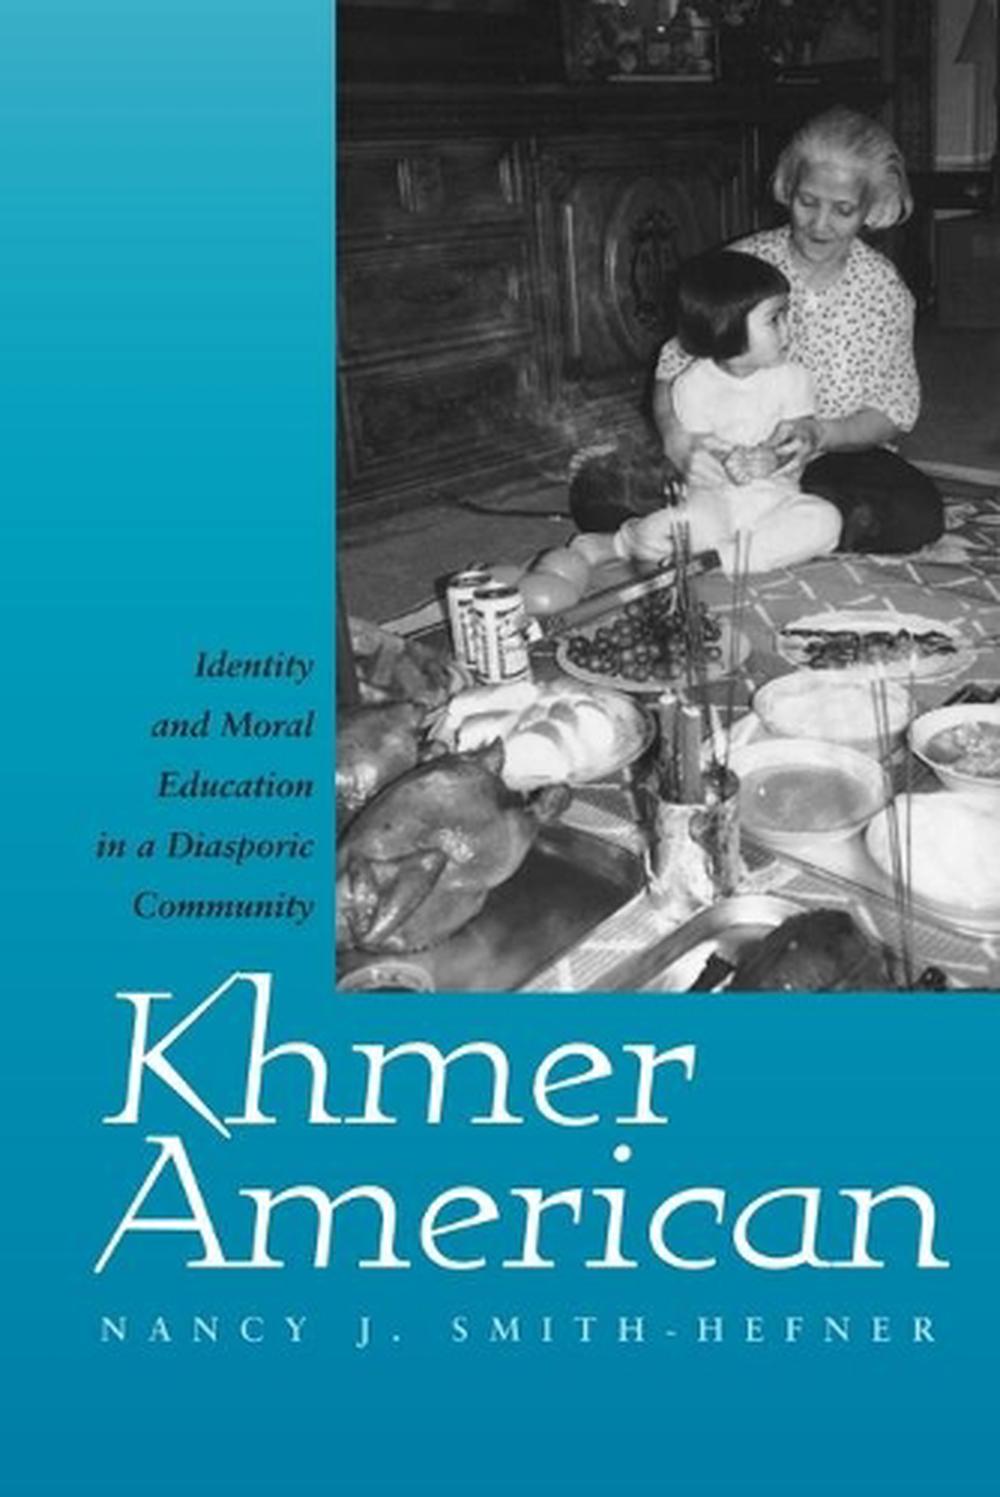 Ethnography on Cambodian Americans